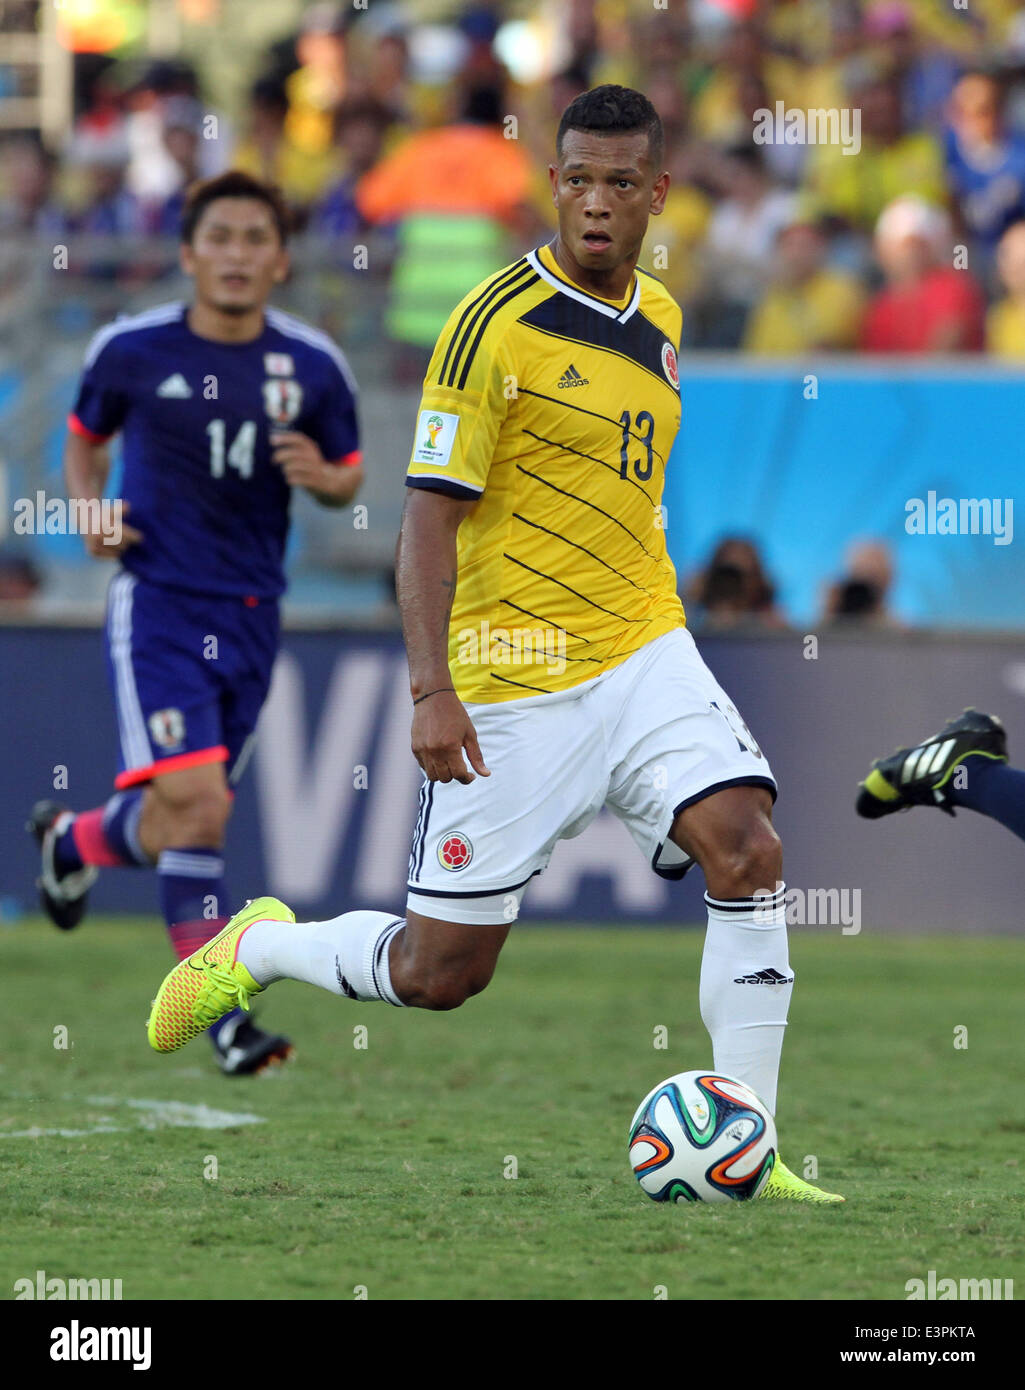 Cuiaba, Brazil. 24th June, 2014. World Cup finals 2014. Japan v Colombia. Guarin in action for Columbia © Action Plus Sports/Alamy Live News Stock Photo